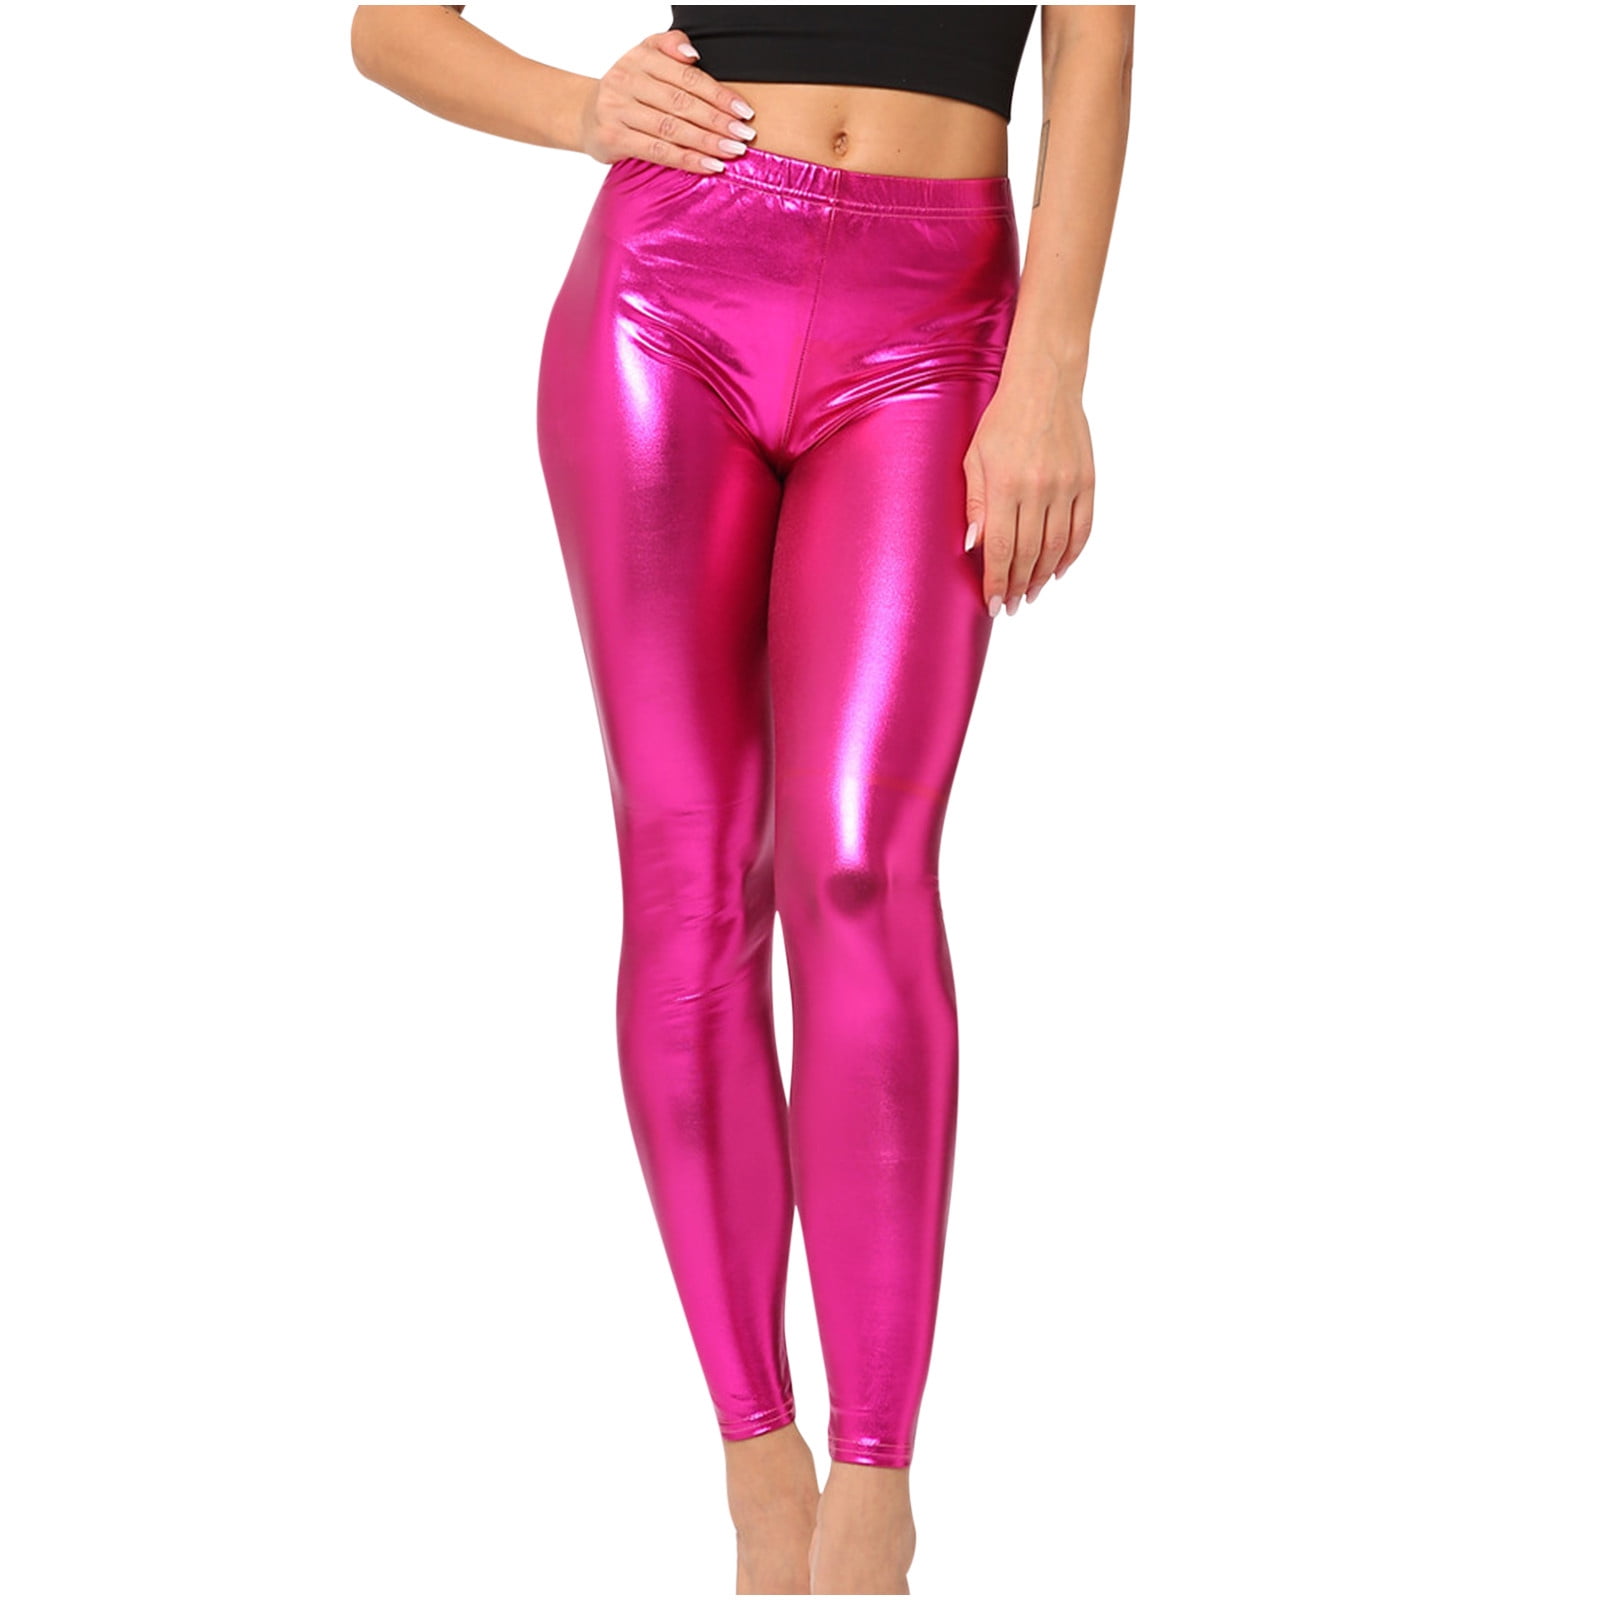 Sparkly Leather Leggings For Women Trendy High Waisted Shiny Sexy Skinny Crop Pants Novelty